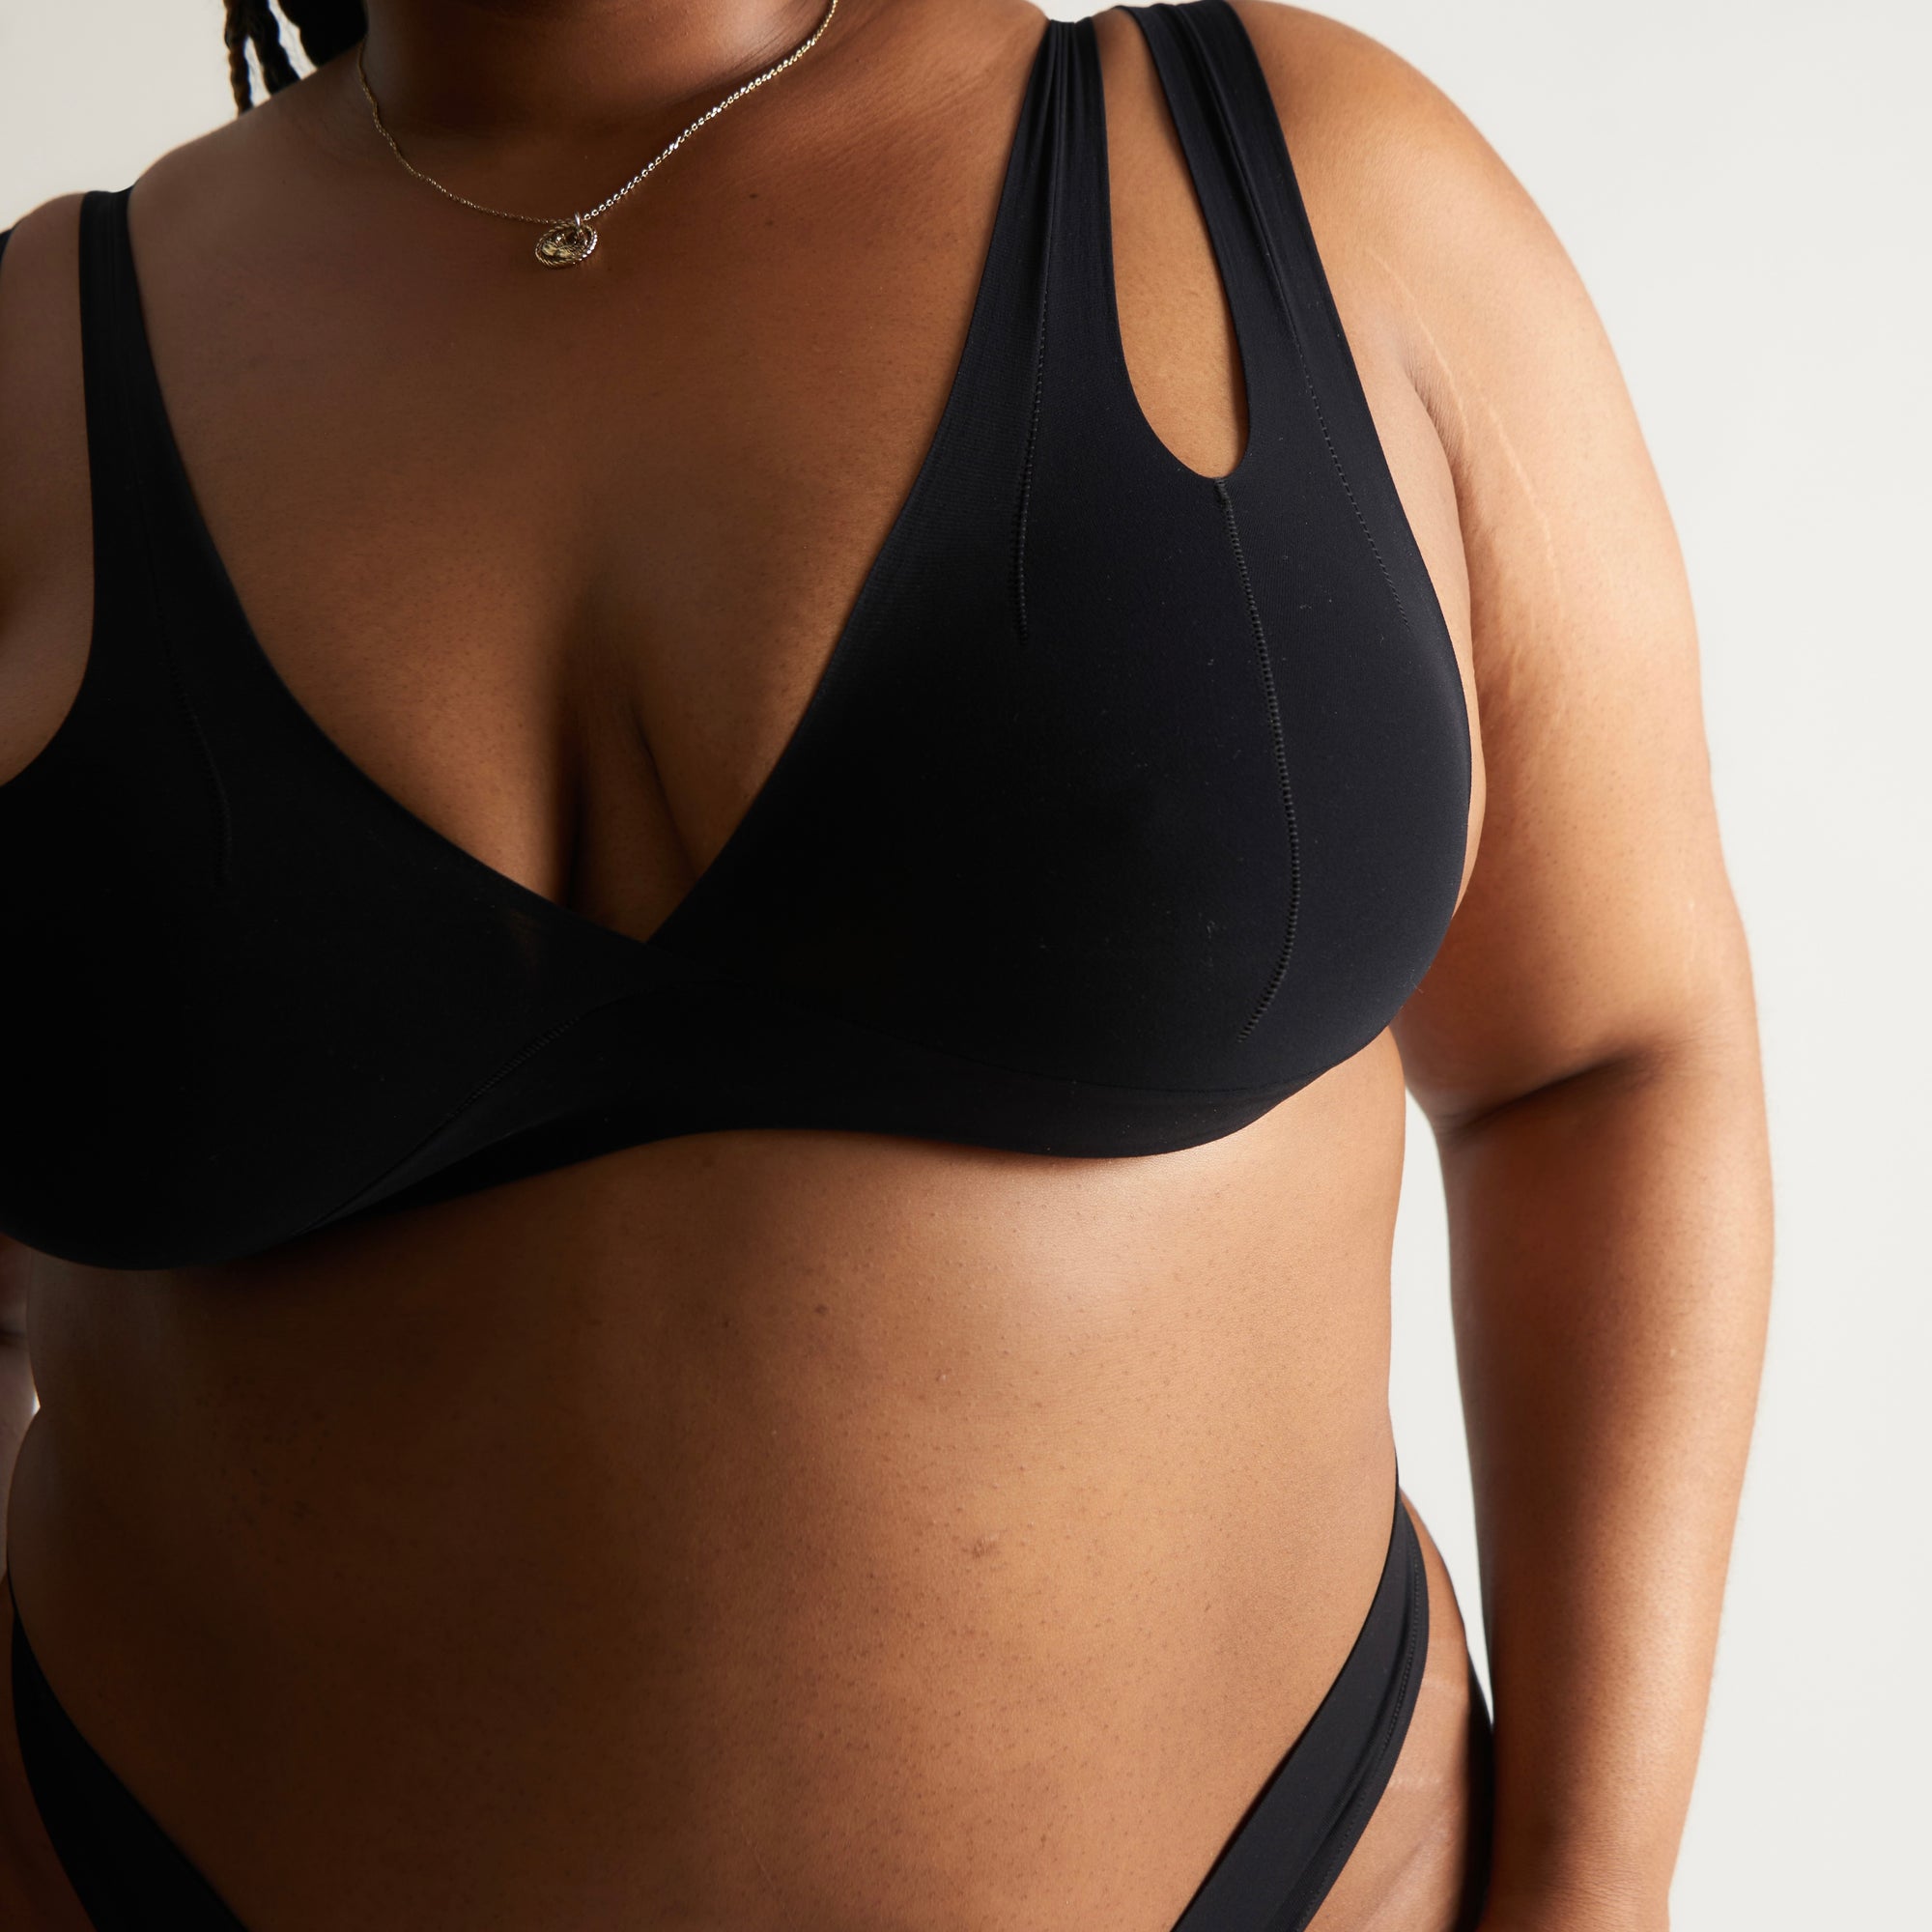 Nuudii System Barely There Boobwear Review